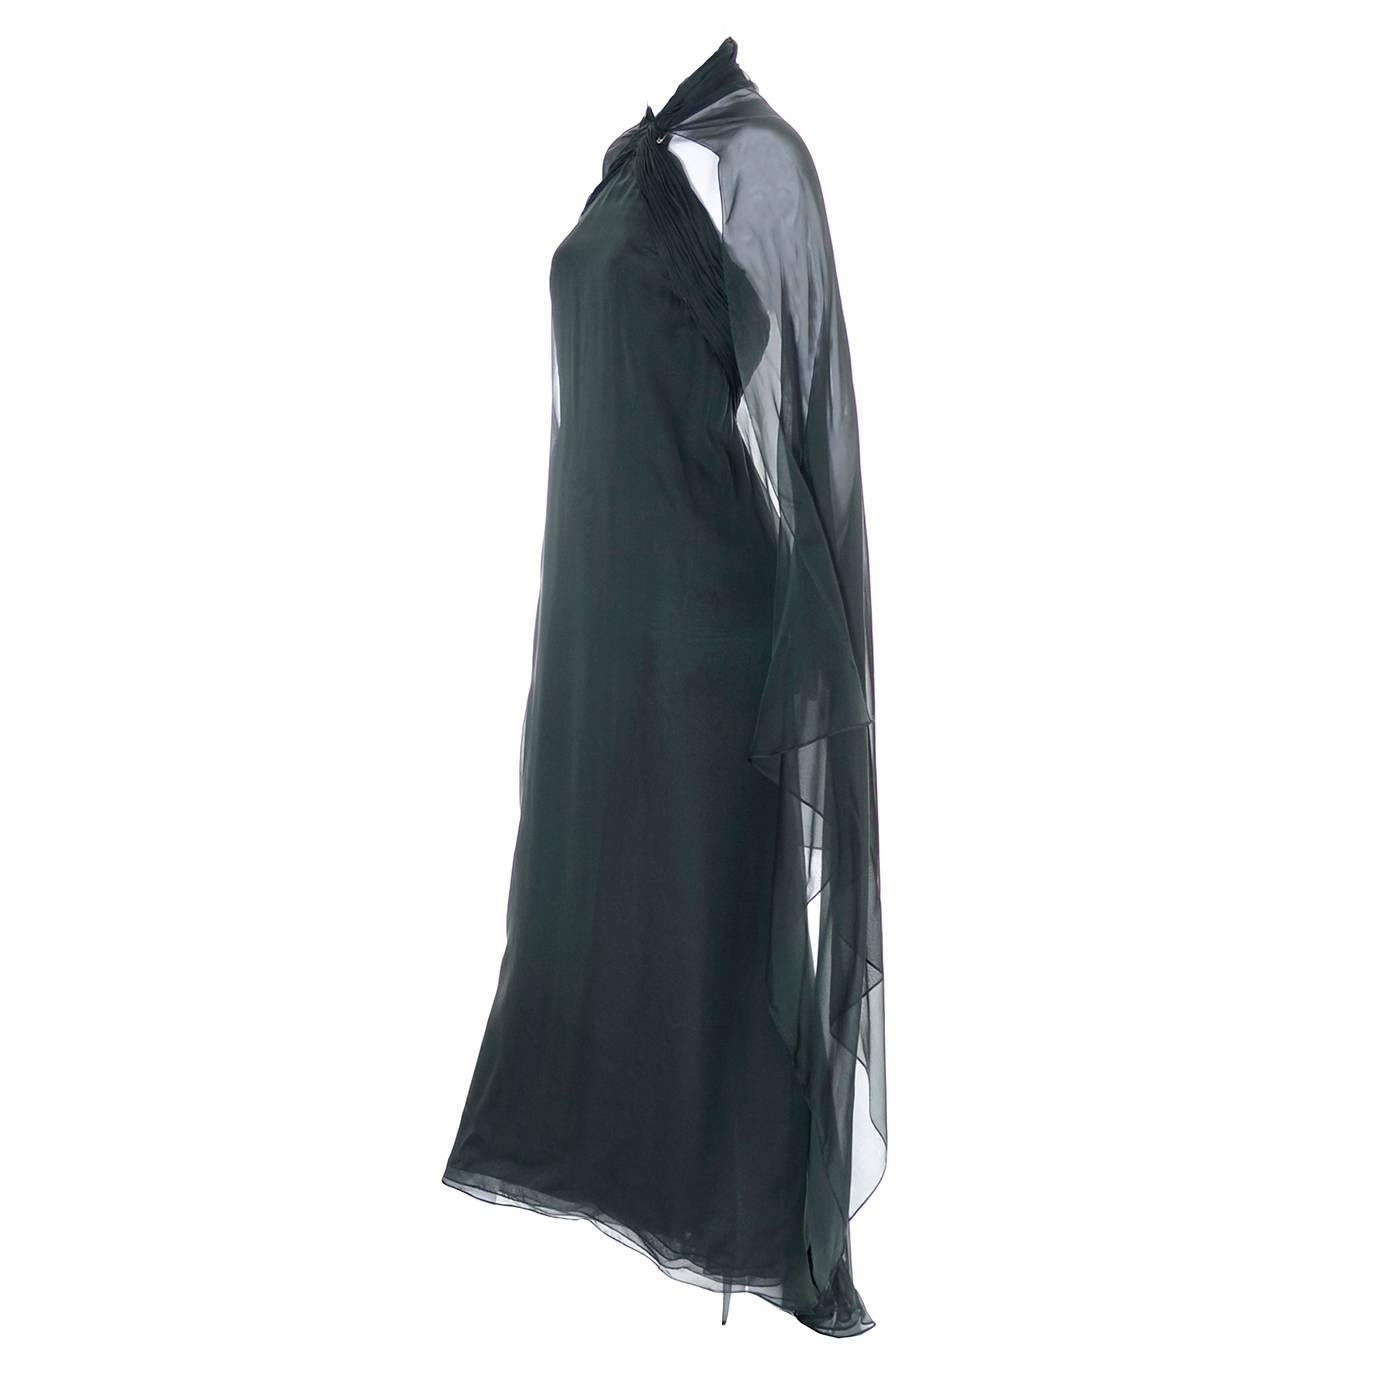 This beautiful vintage green silk dress was designed by Oscar de la Renta in the 1990's and was sold at Saks Fifth Avenue.  This deep green silk chiffon dress has an empire waist and an attached, flowing cape that can be worn as a cape or just left